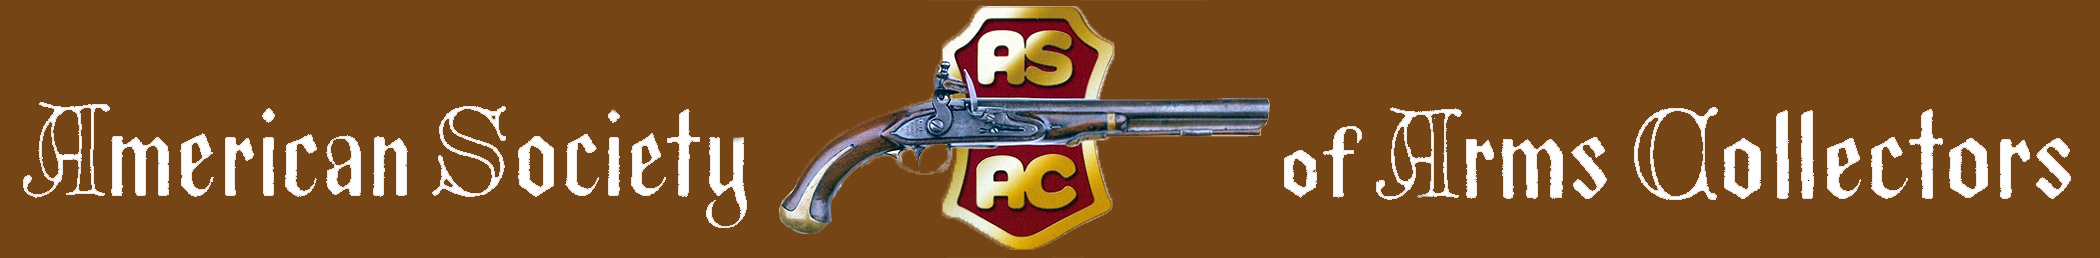 American Society of Arms Collectors logo